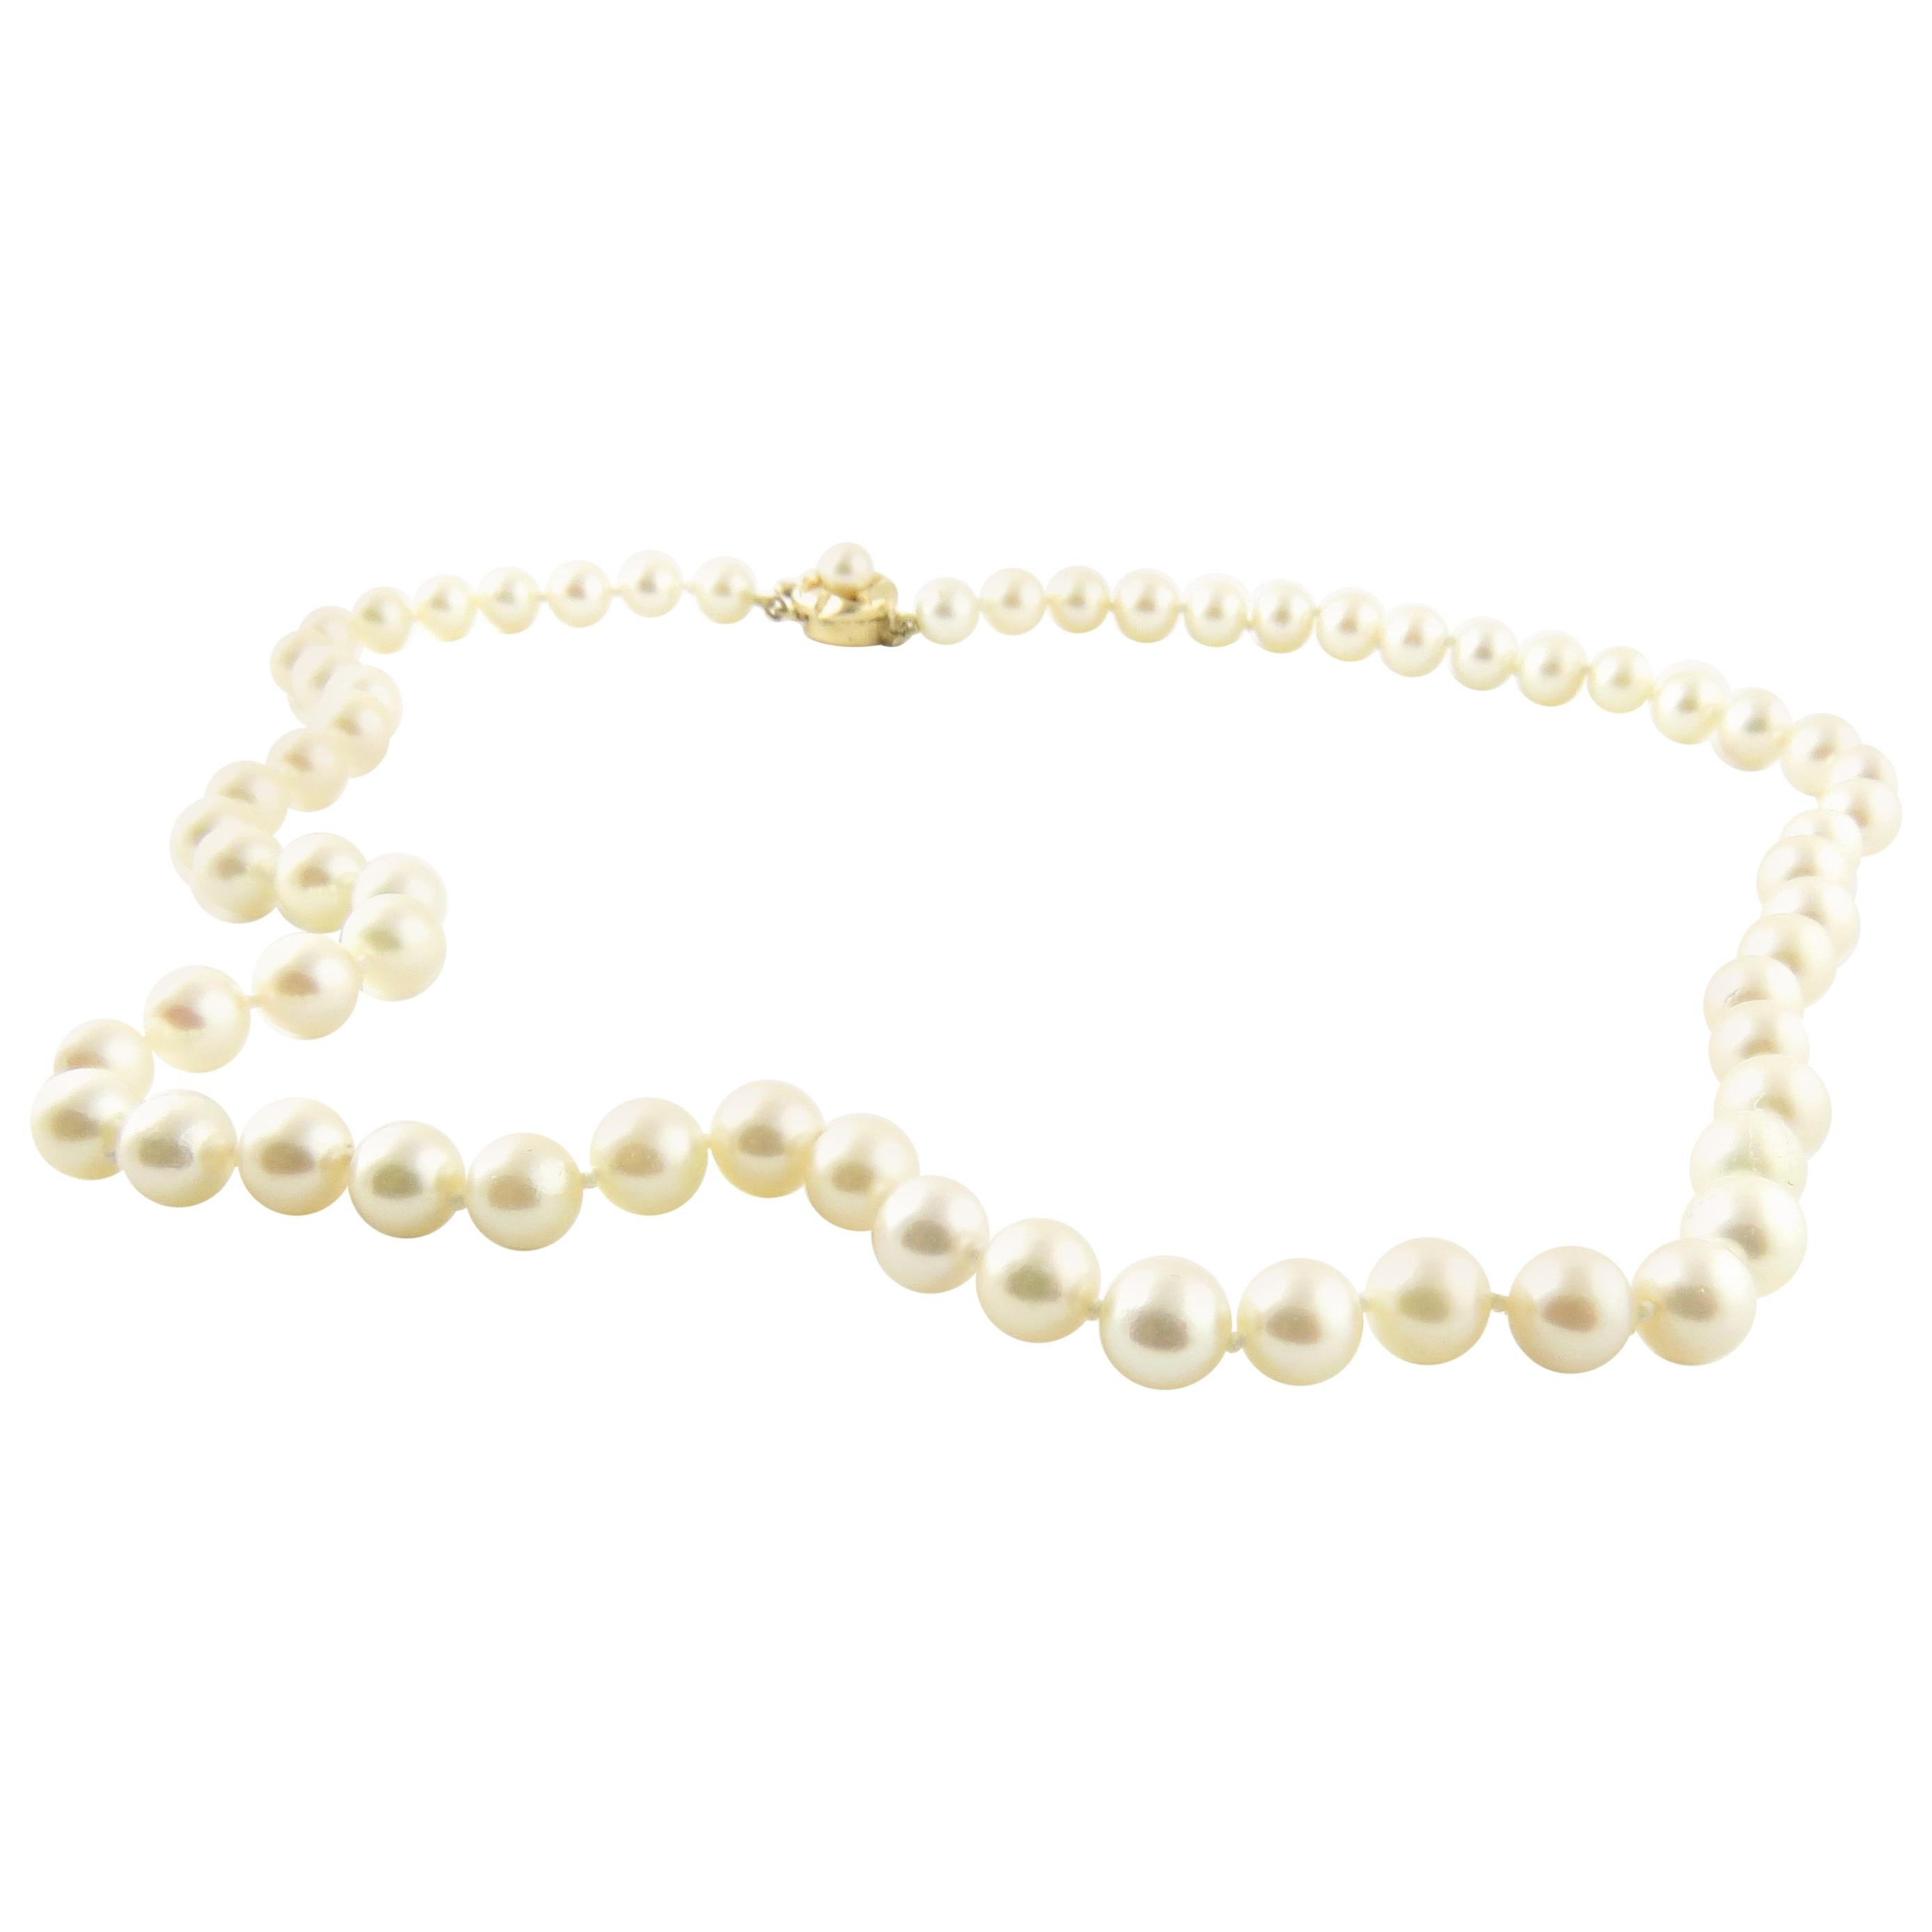 Pearl Necklace with 14 Karat Yellow Gold Closure